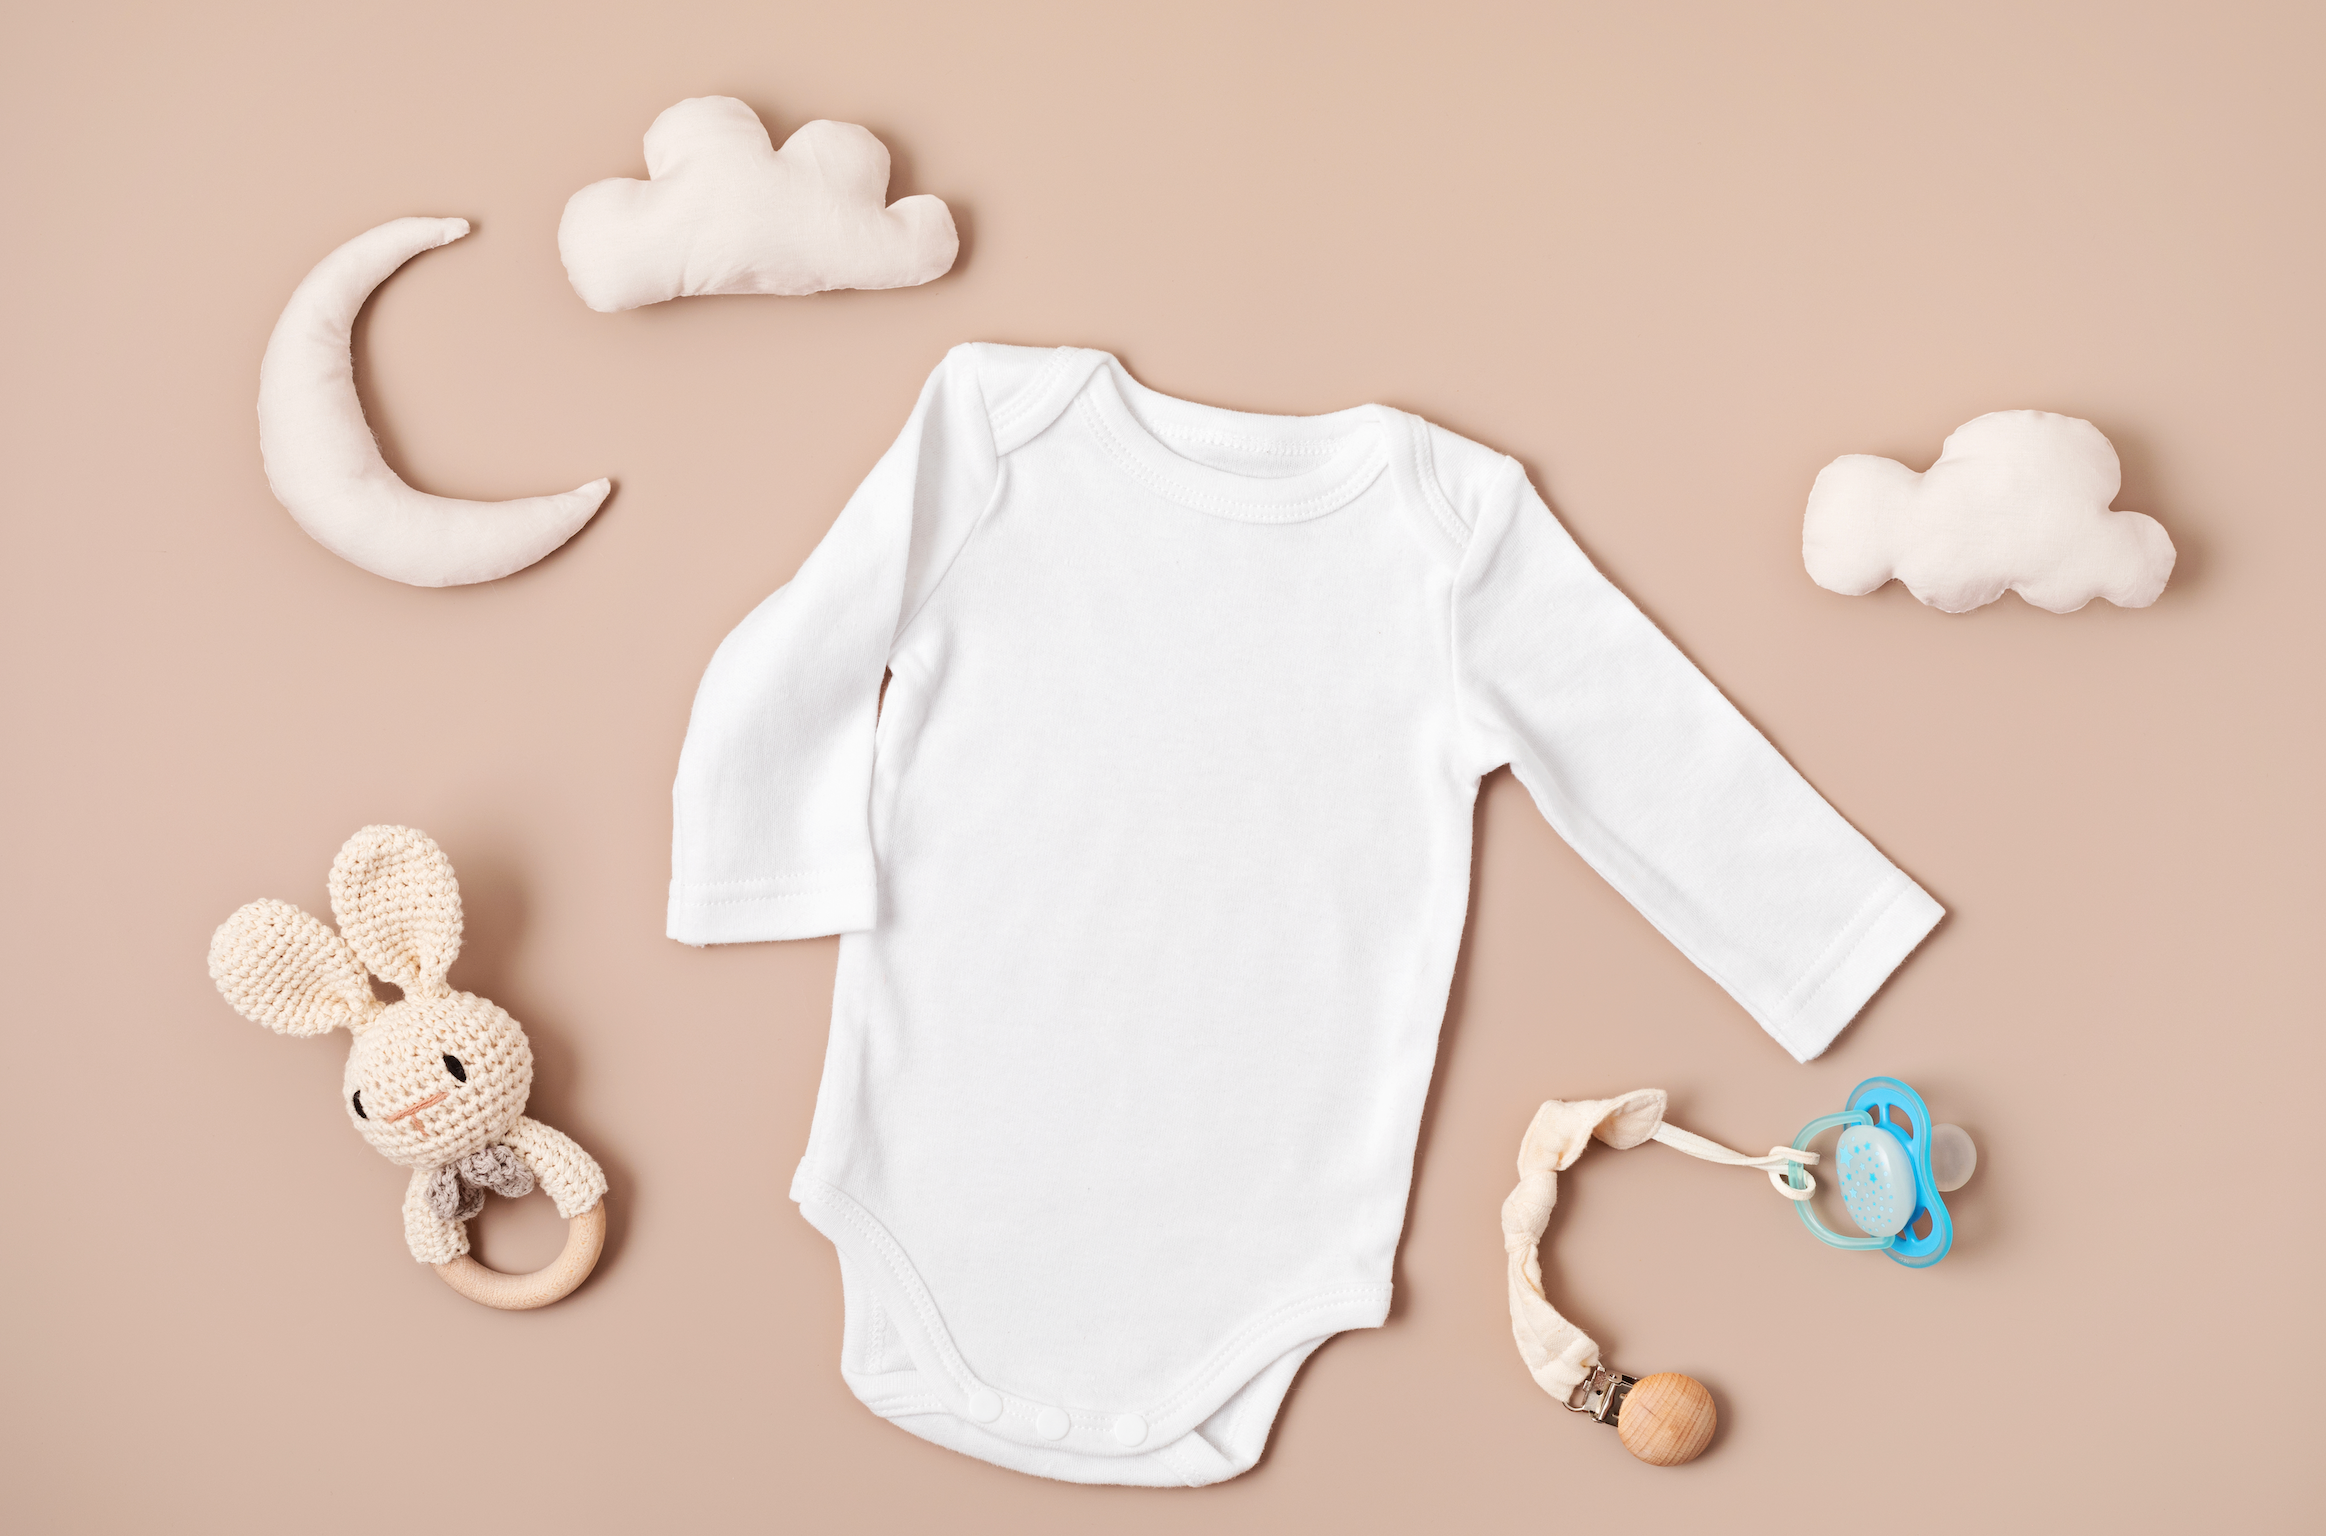 How Many Baby Clothes Do You Need in The First Year?